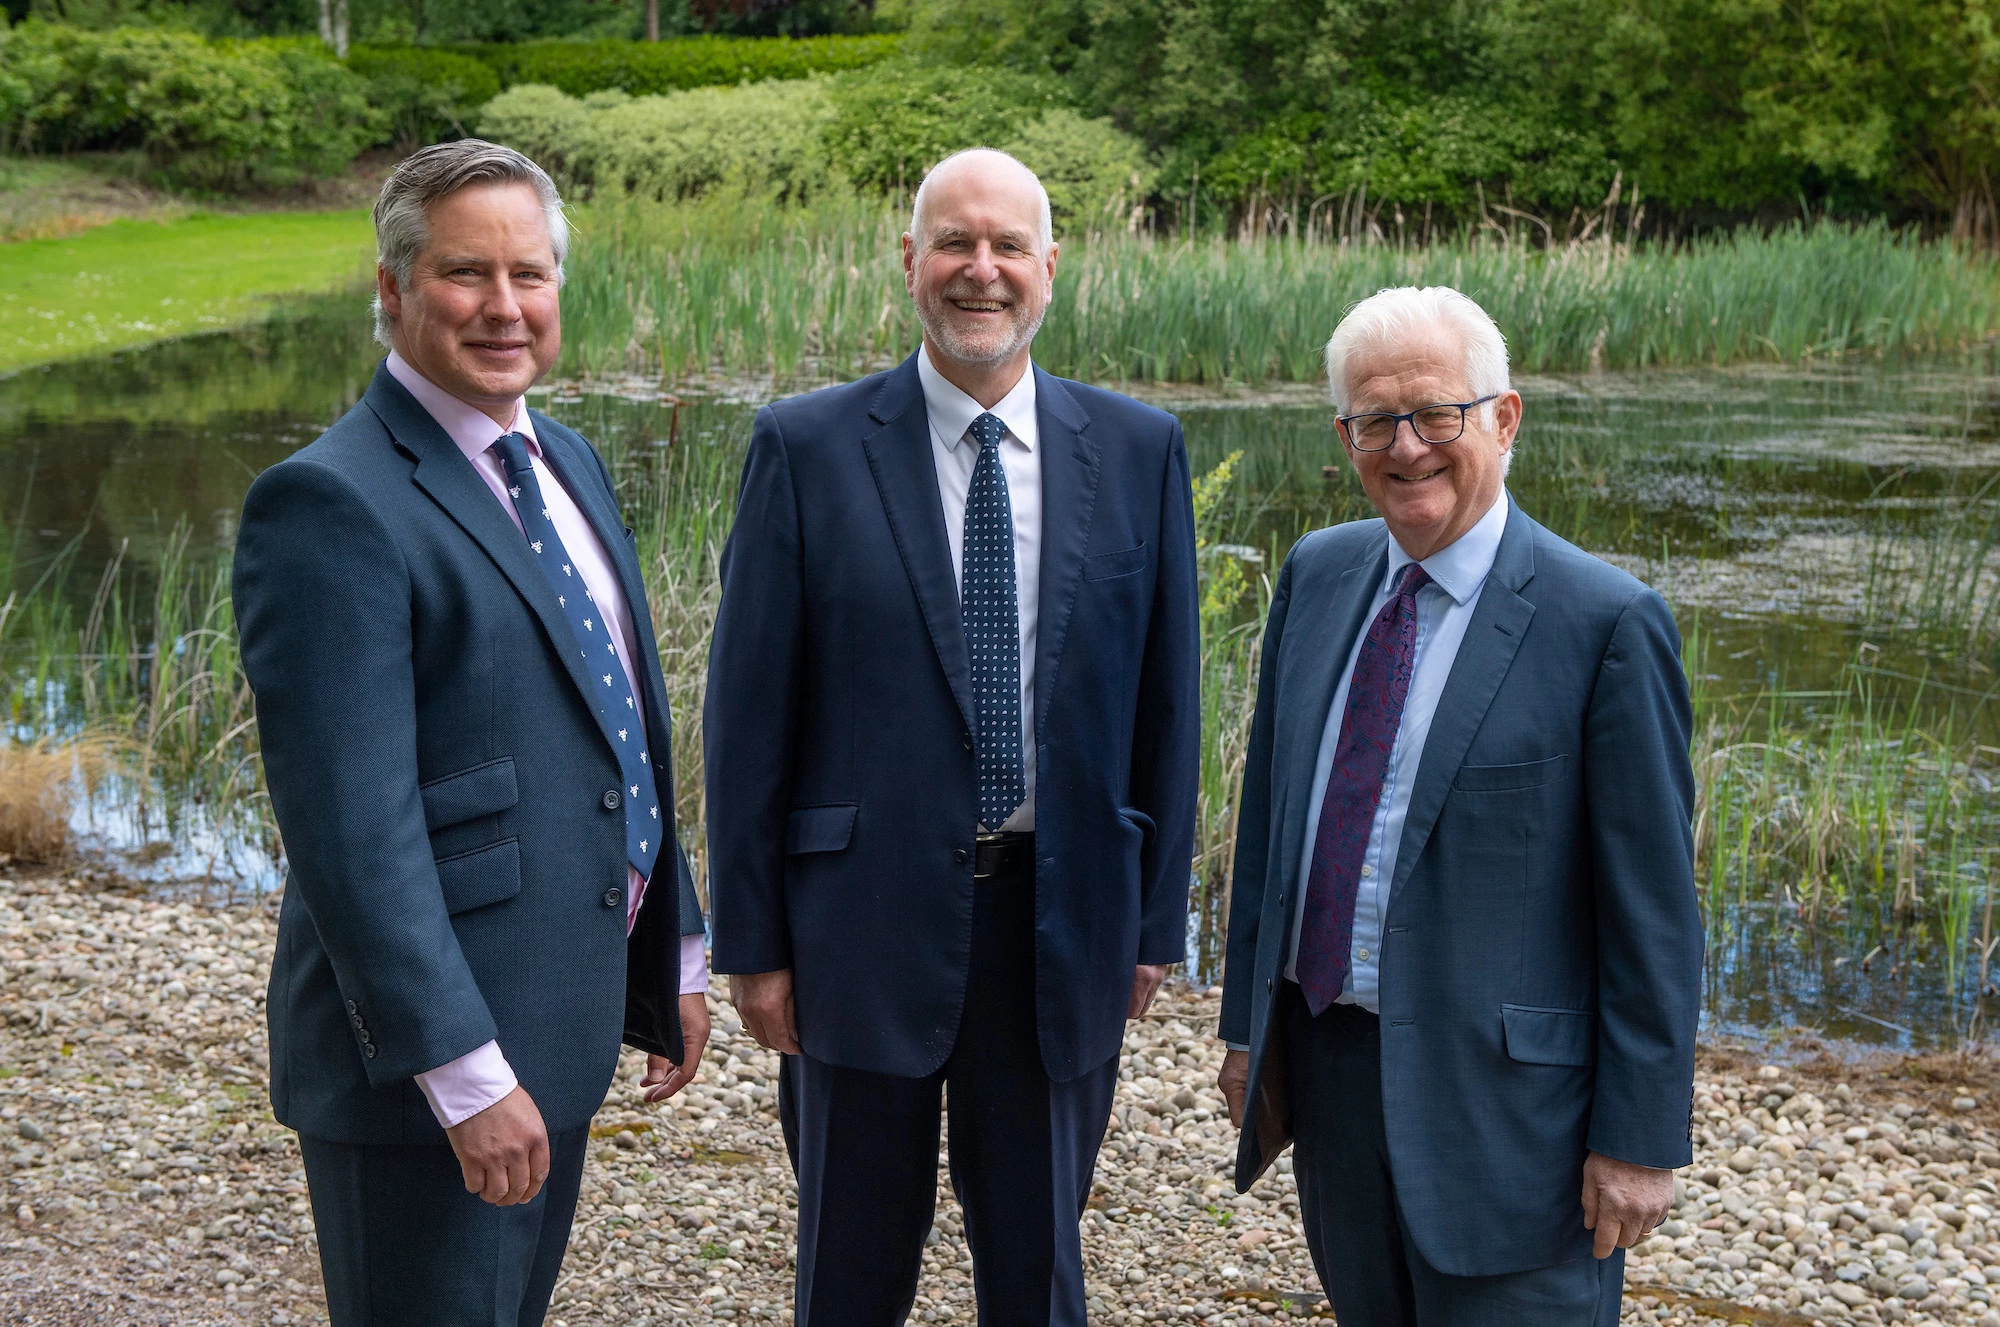 Charles Smith is welcomed to Bromwich Hardy by Tom Bromwich and fellow founding partner Richard Hardy